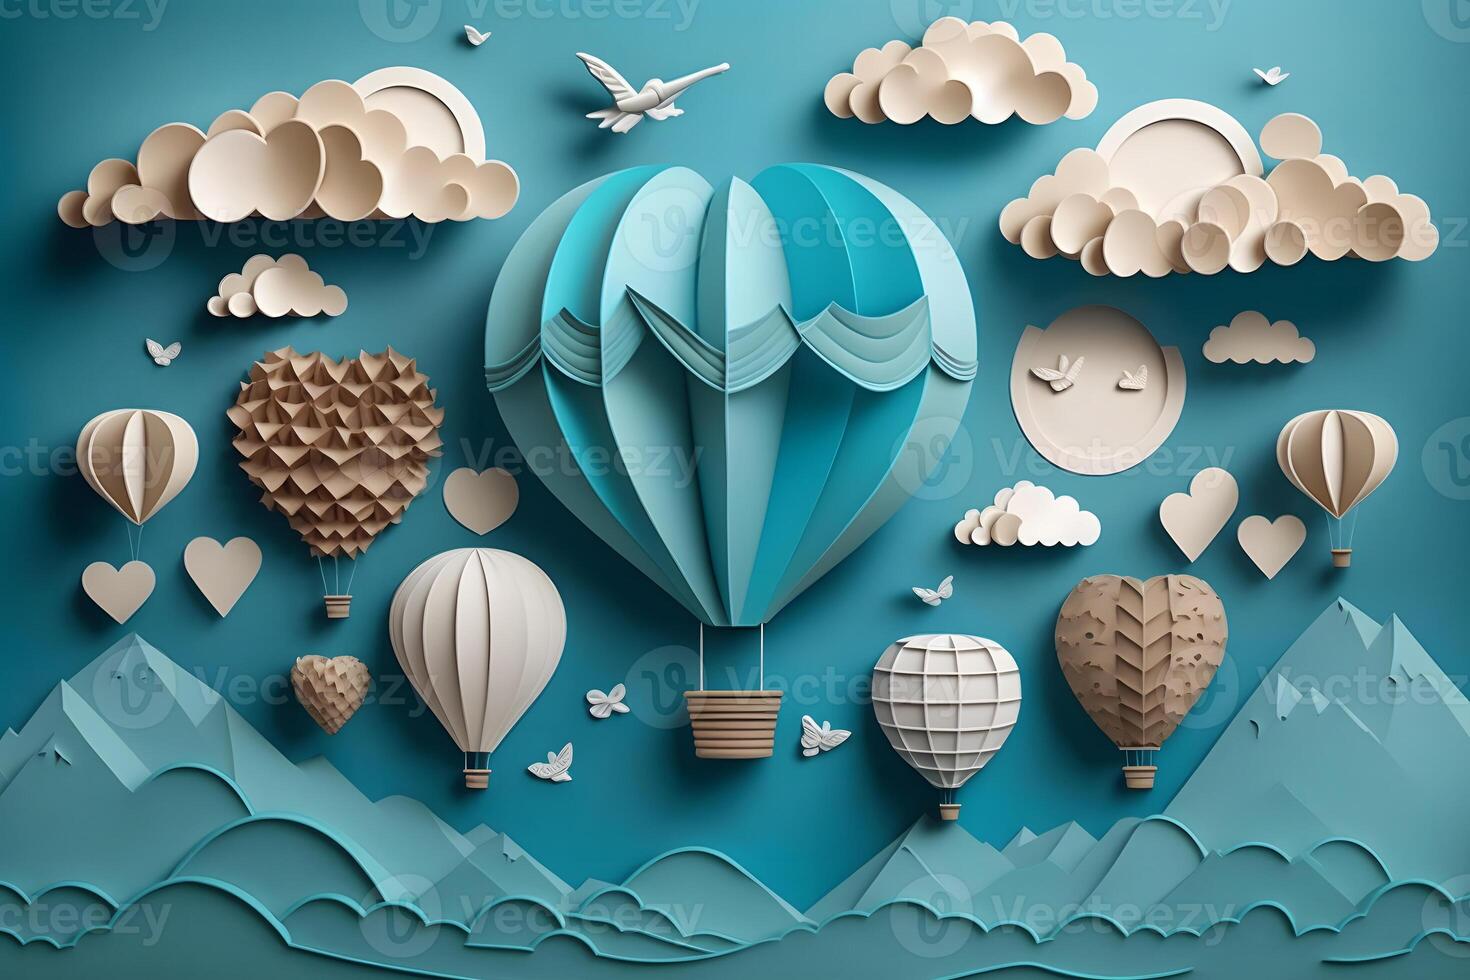 Hot air balloon, space elements shapes cut from paper. Creative concept for banner, landing, background designs. Neural network photo